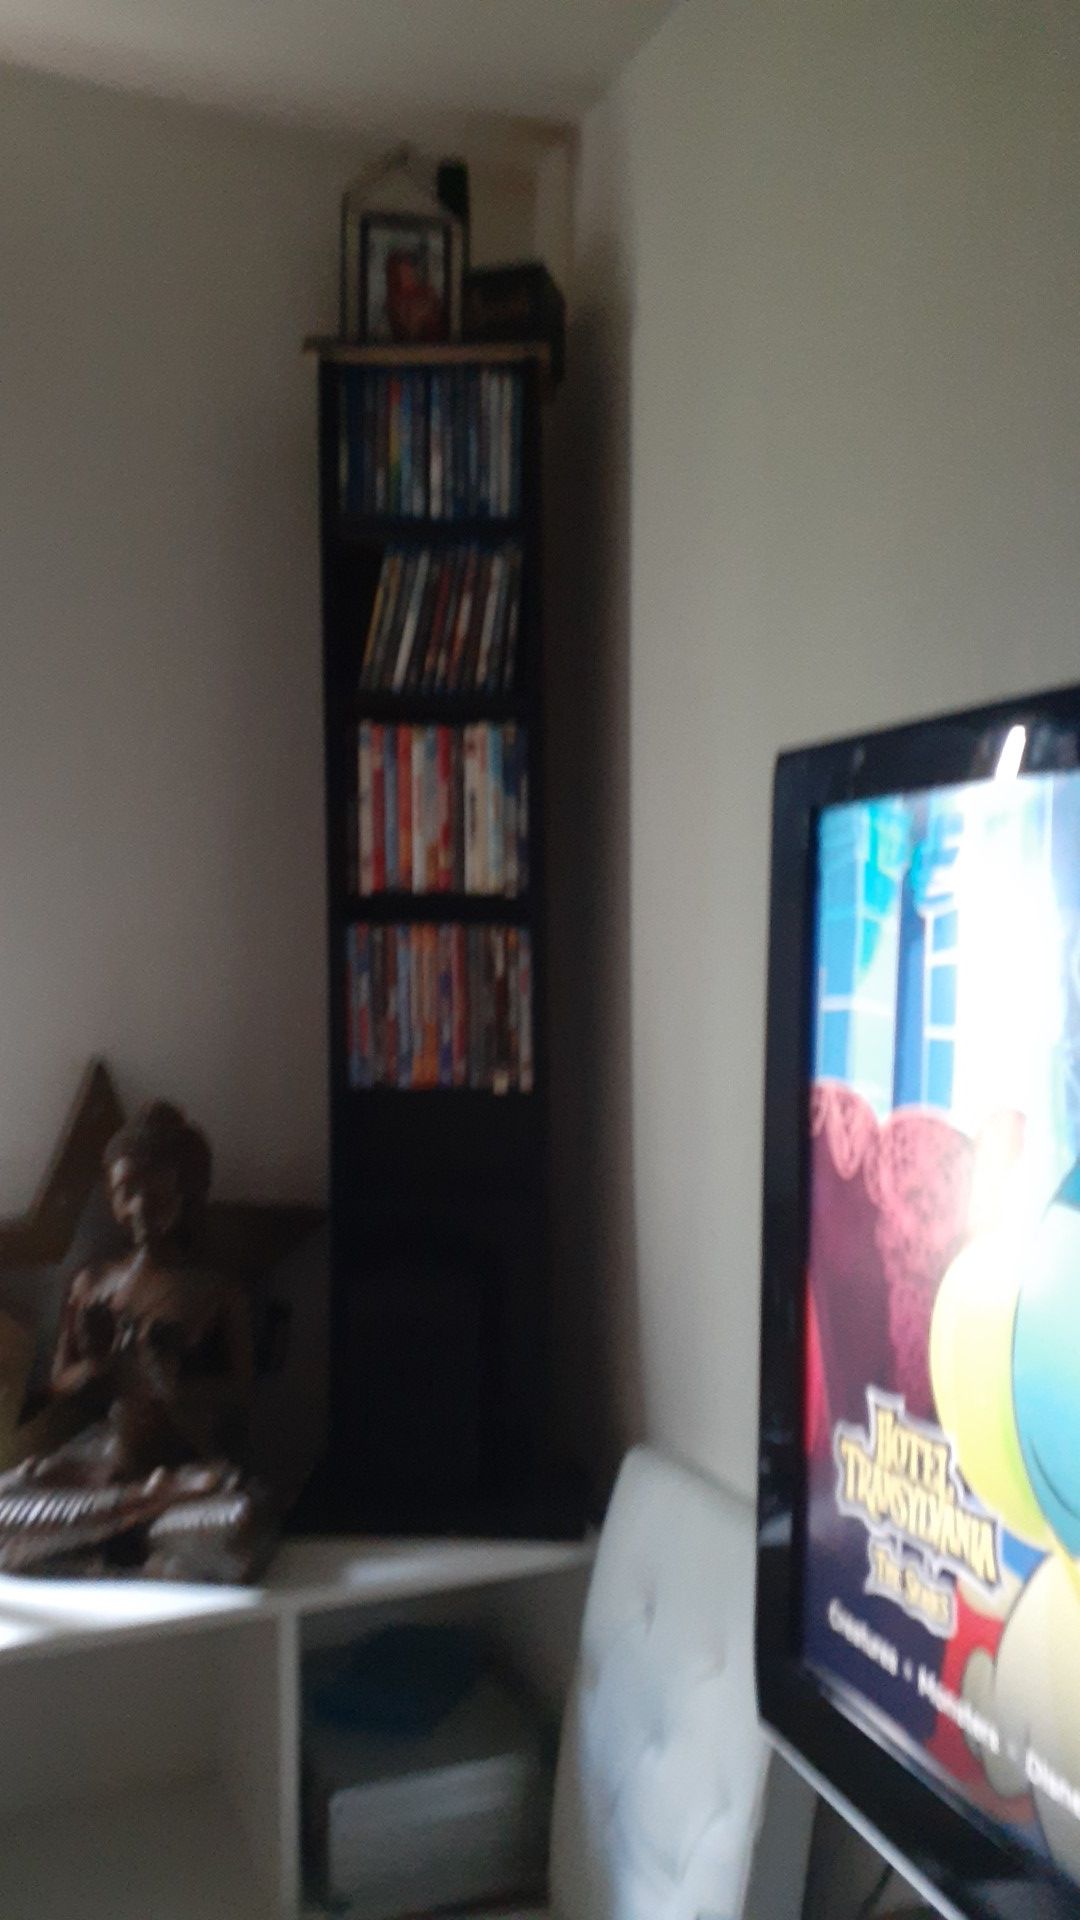 TV. DVD player . And DVD case holder with DVDs